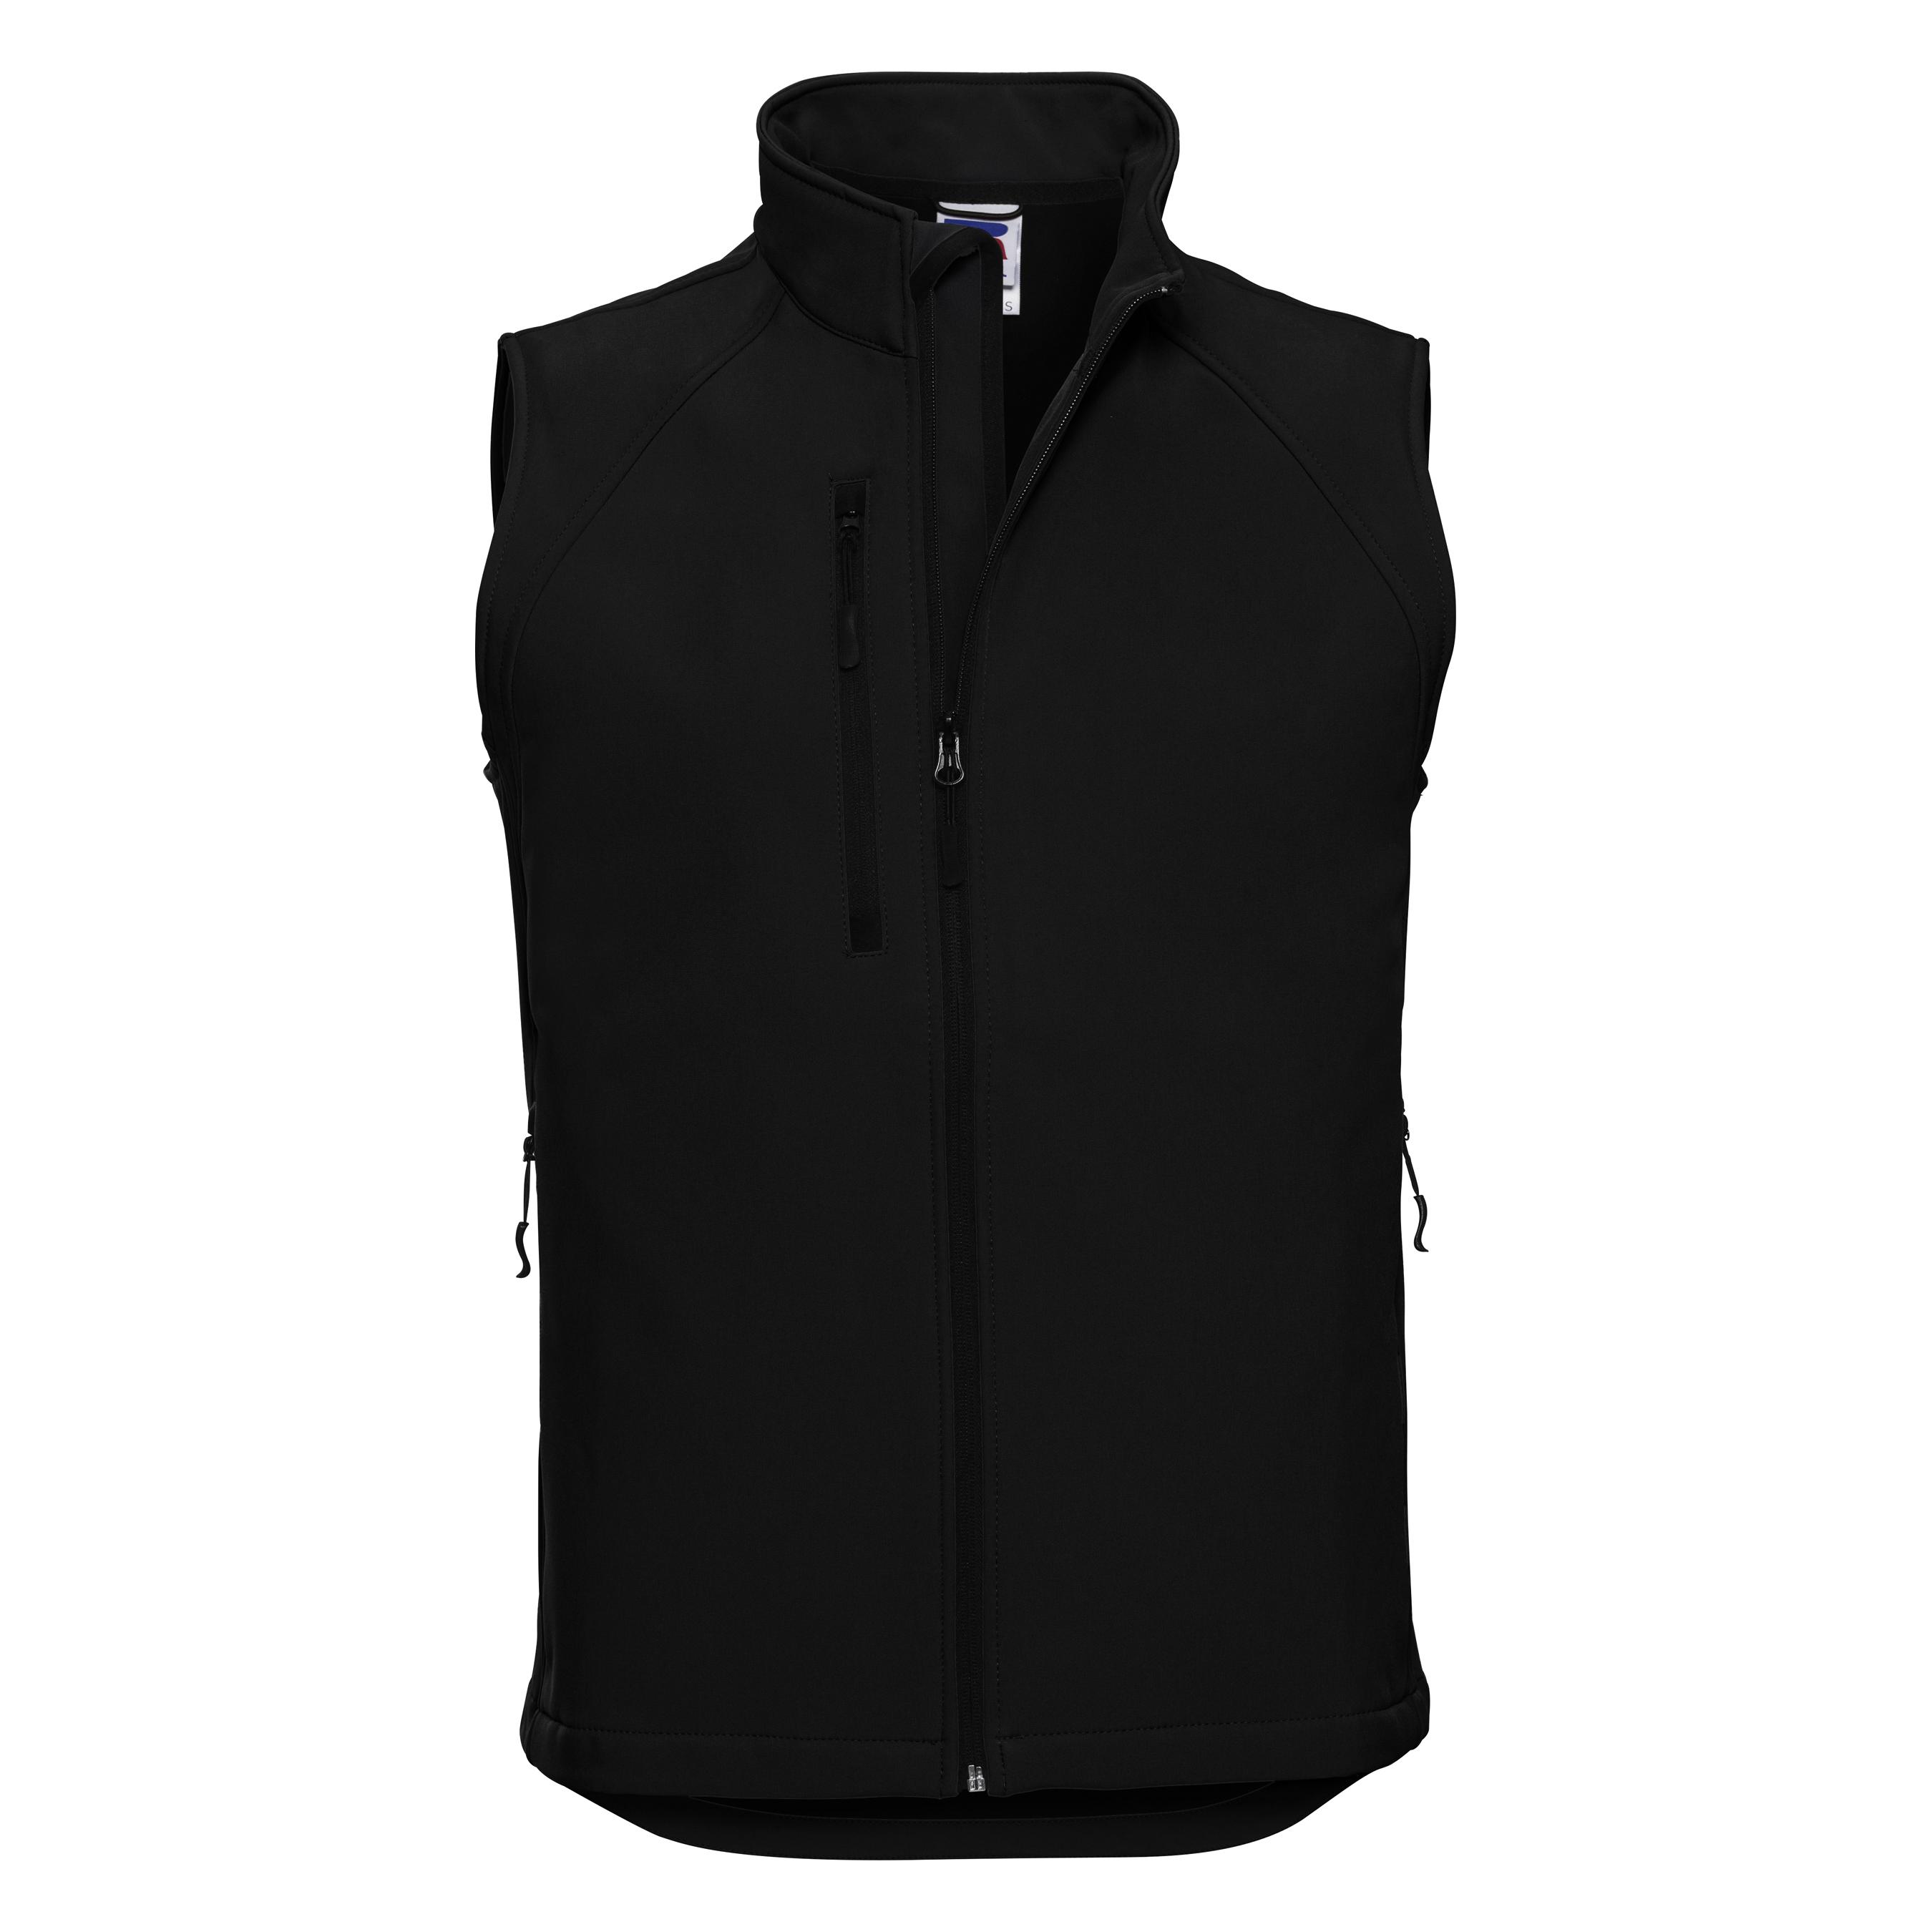 141M Russell Softshell Gilet can have your logo embroidered or printed